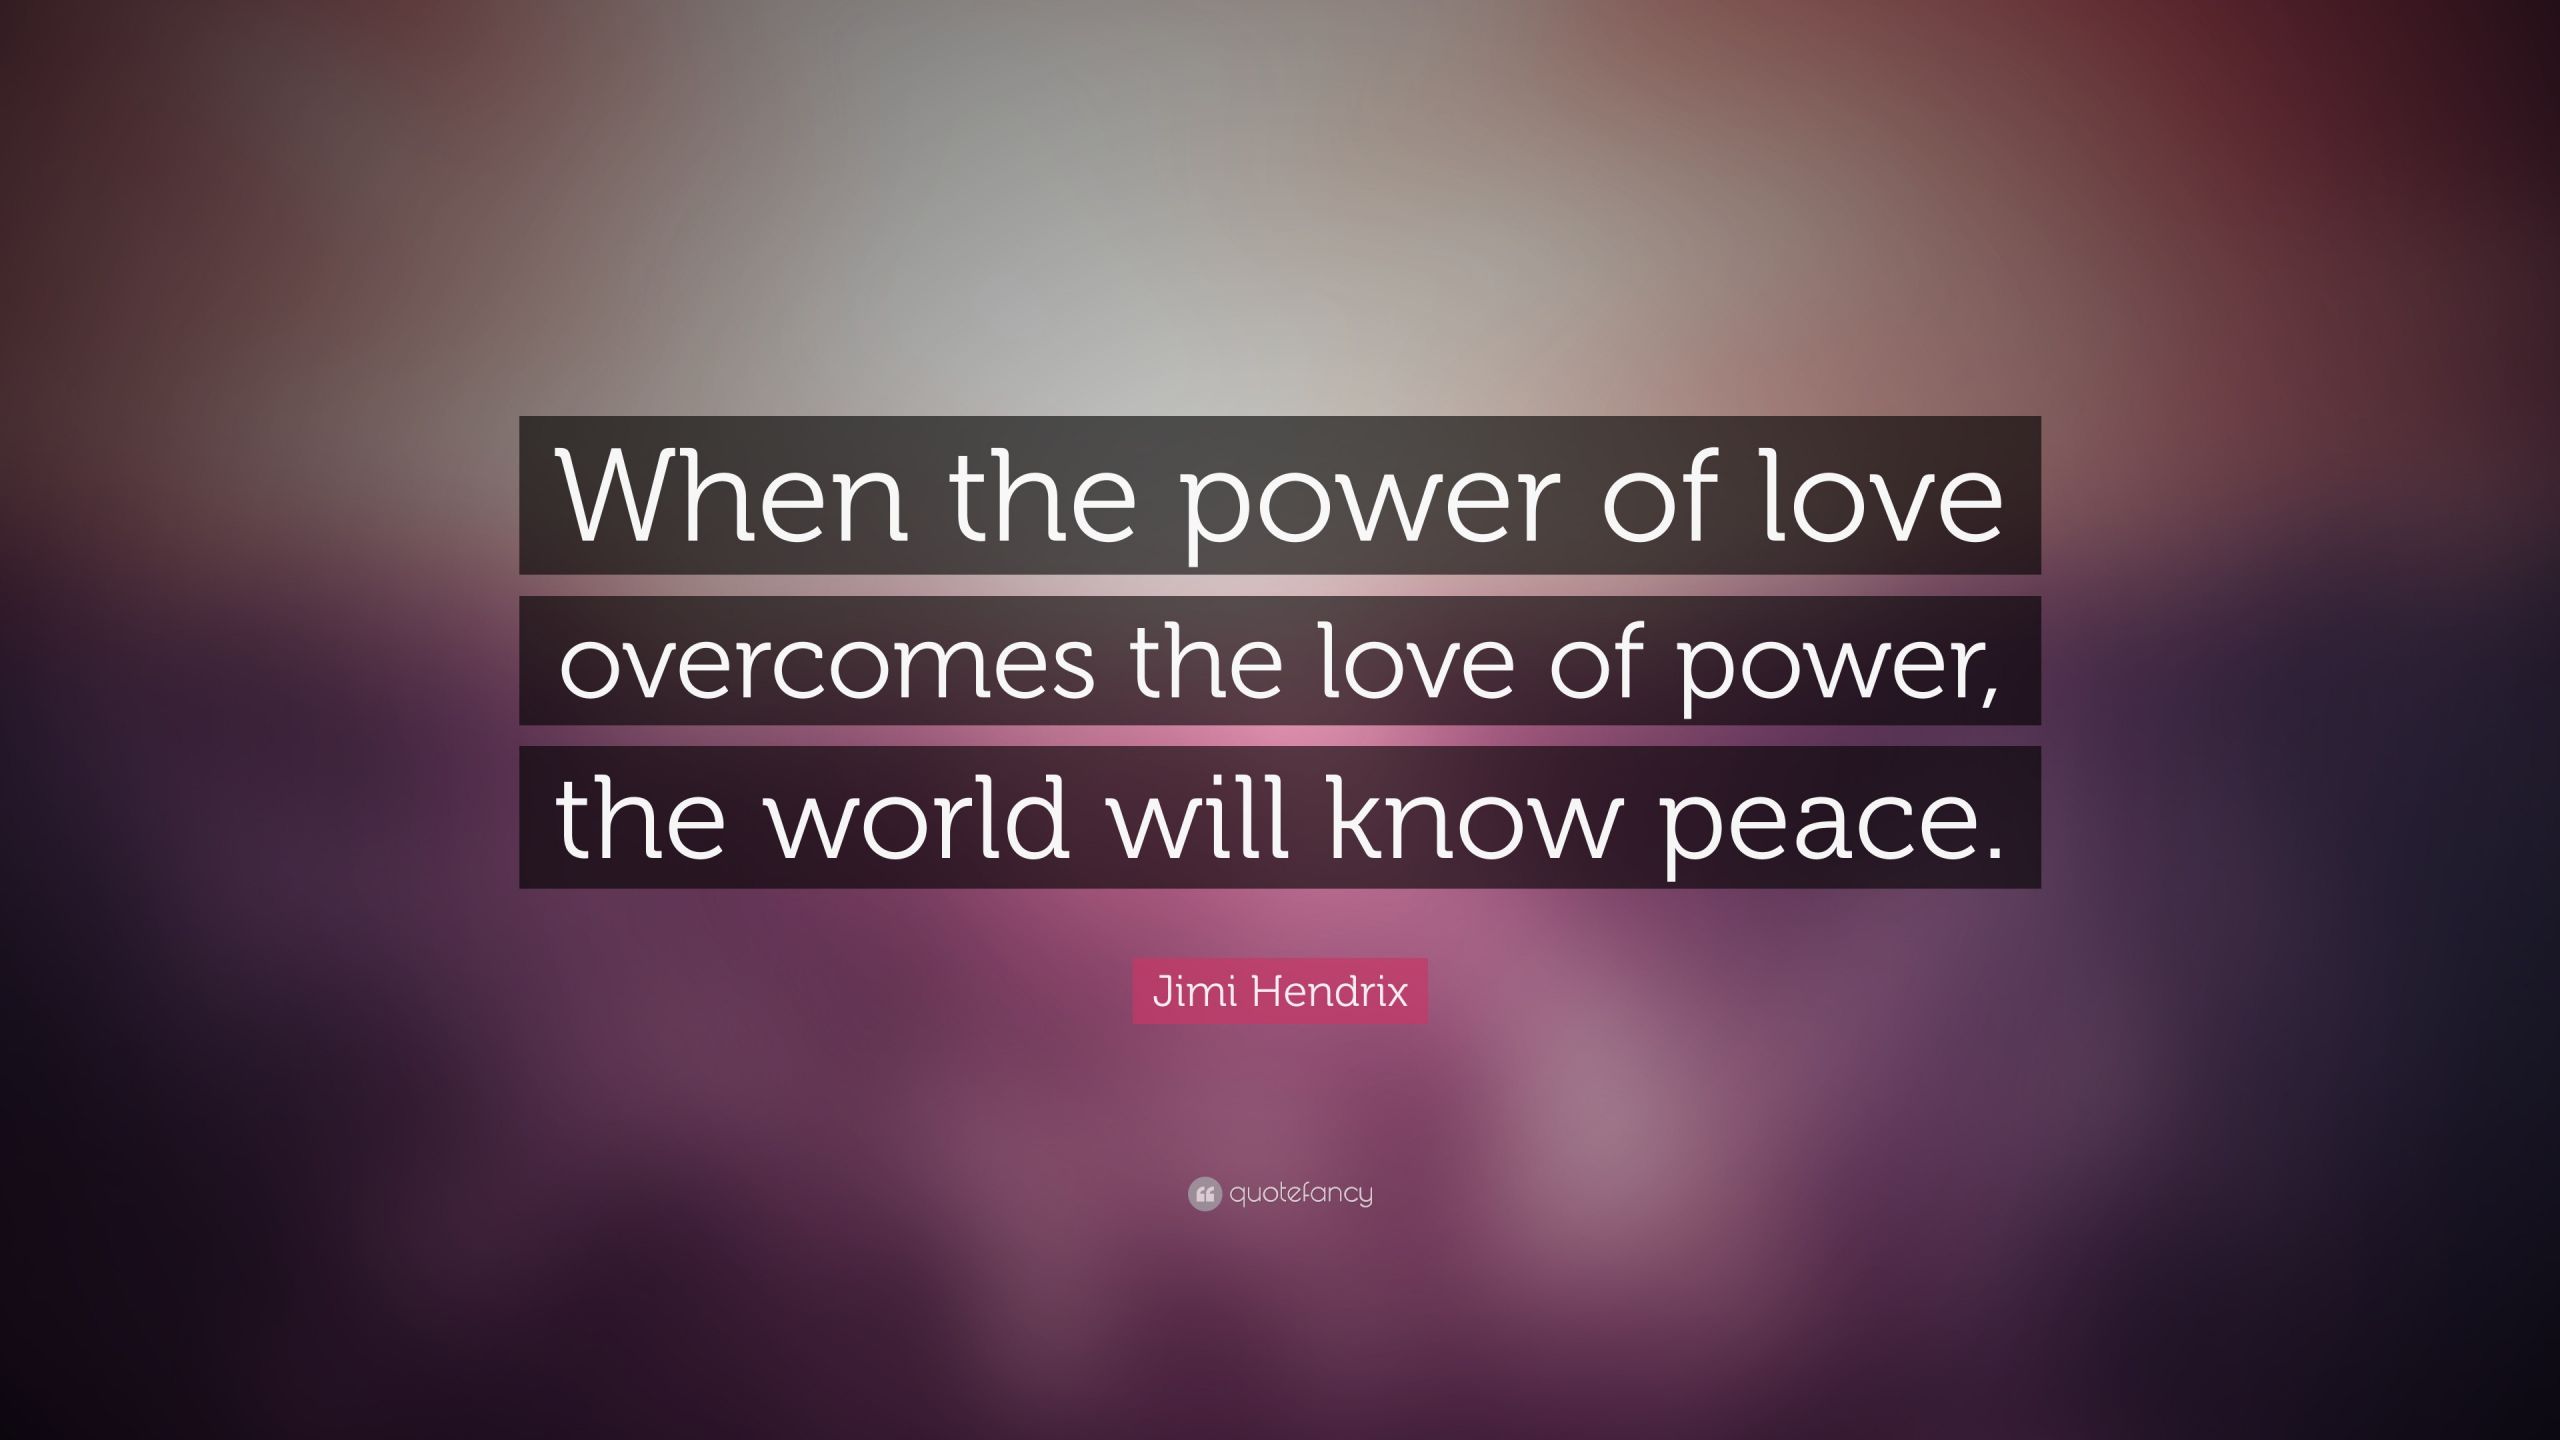 The Power Of Love Quote
 Jimi Hendrix Quotes 11 wallpapers Quotefancy